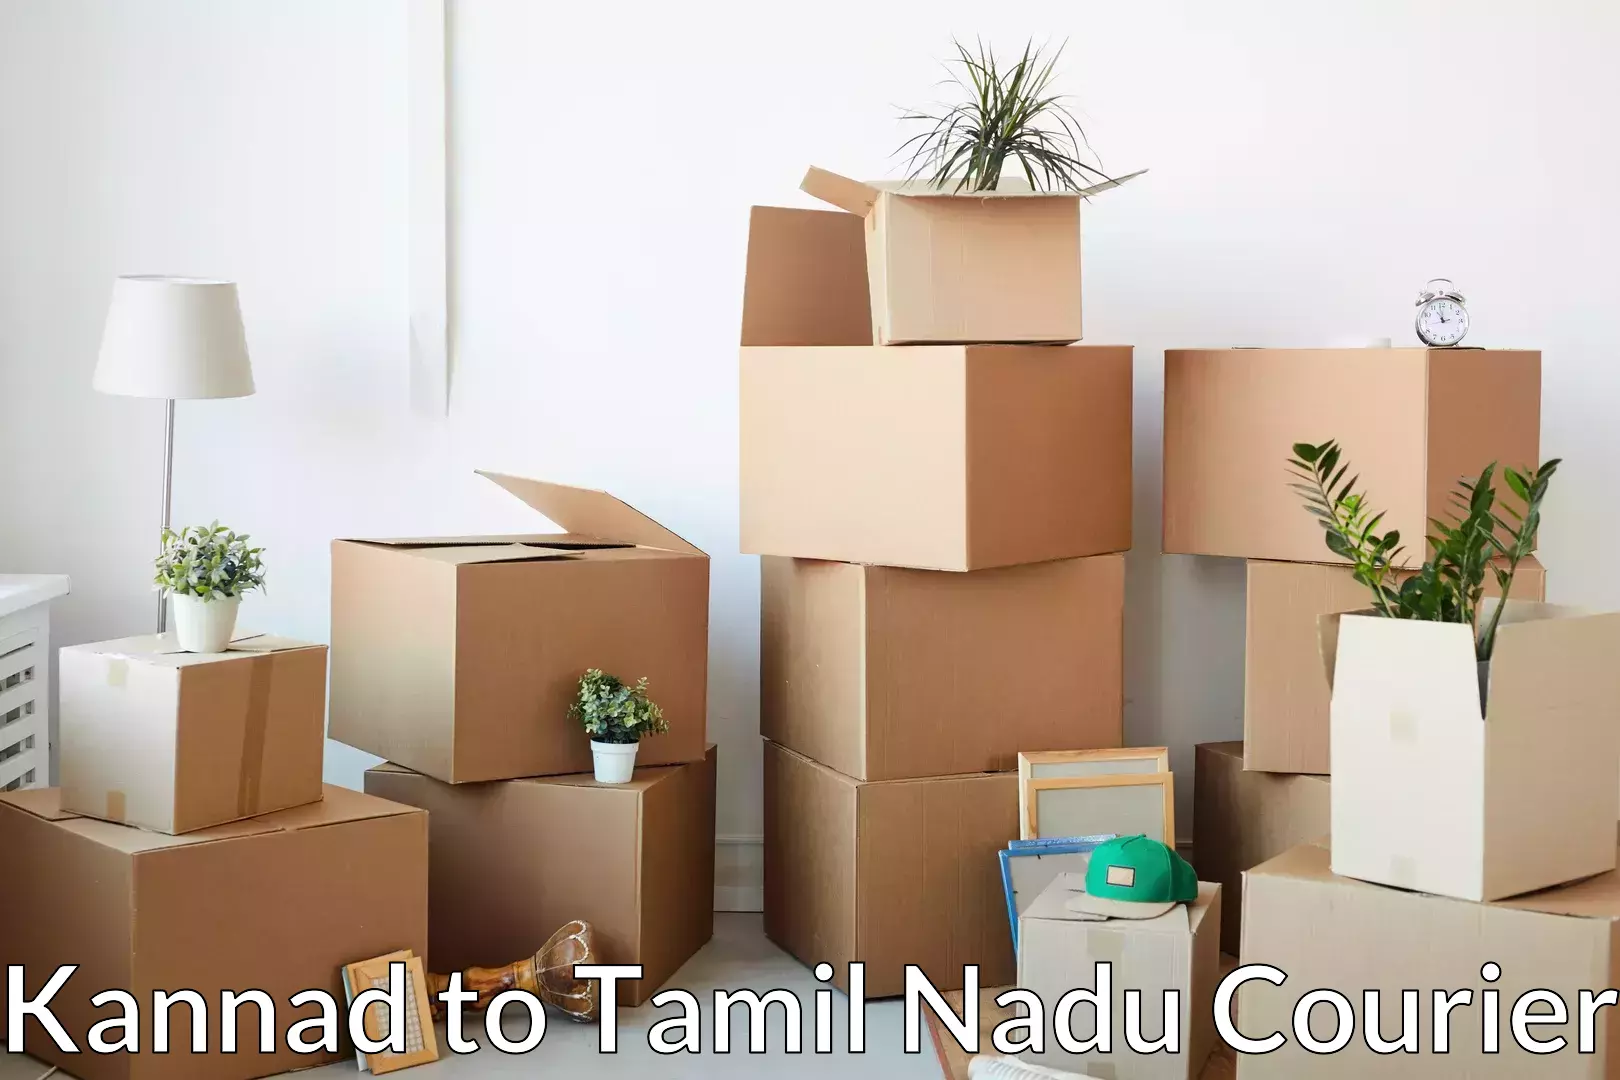 Cost-effective moving options Kannad to Vadipatti